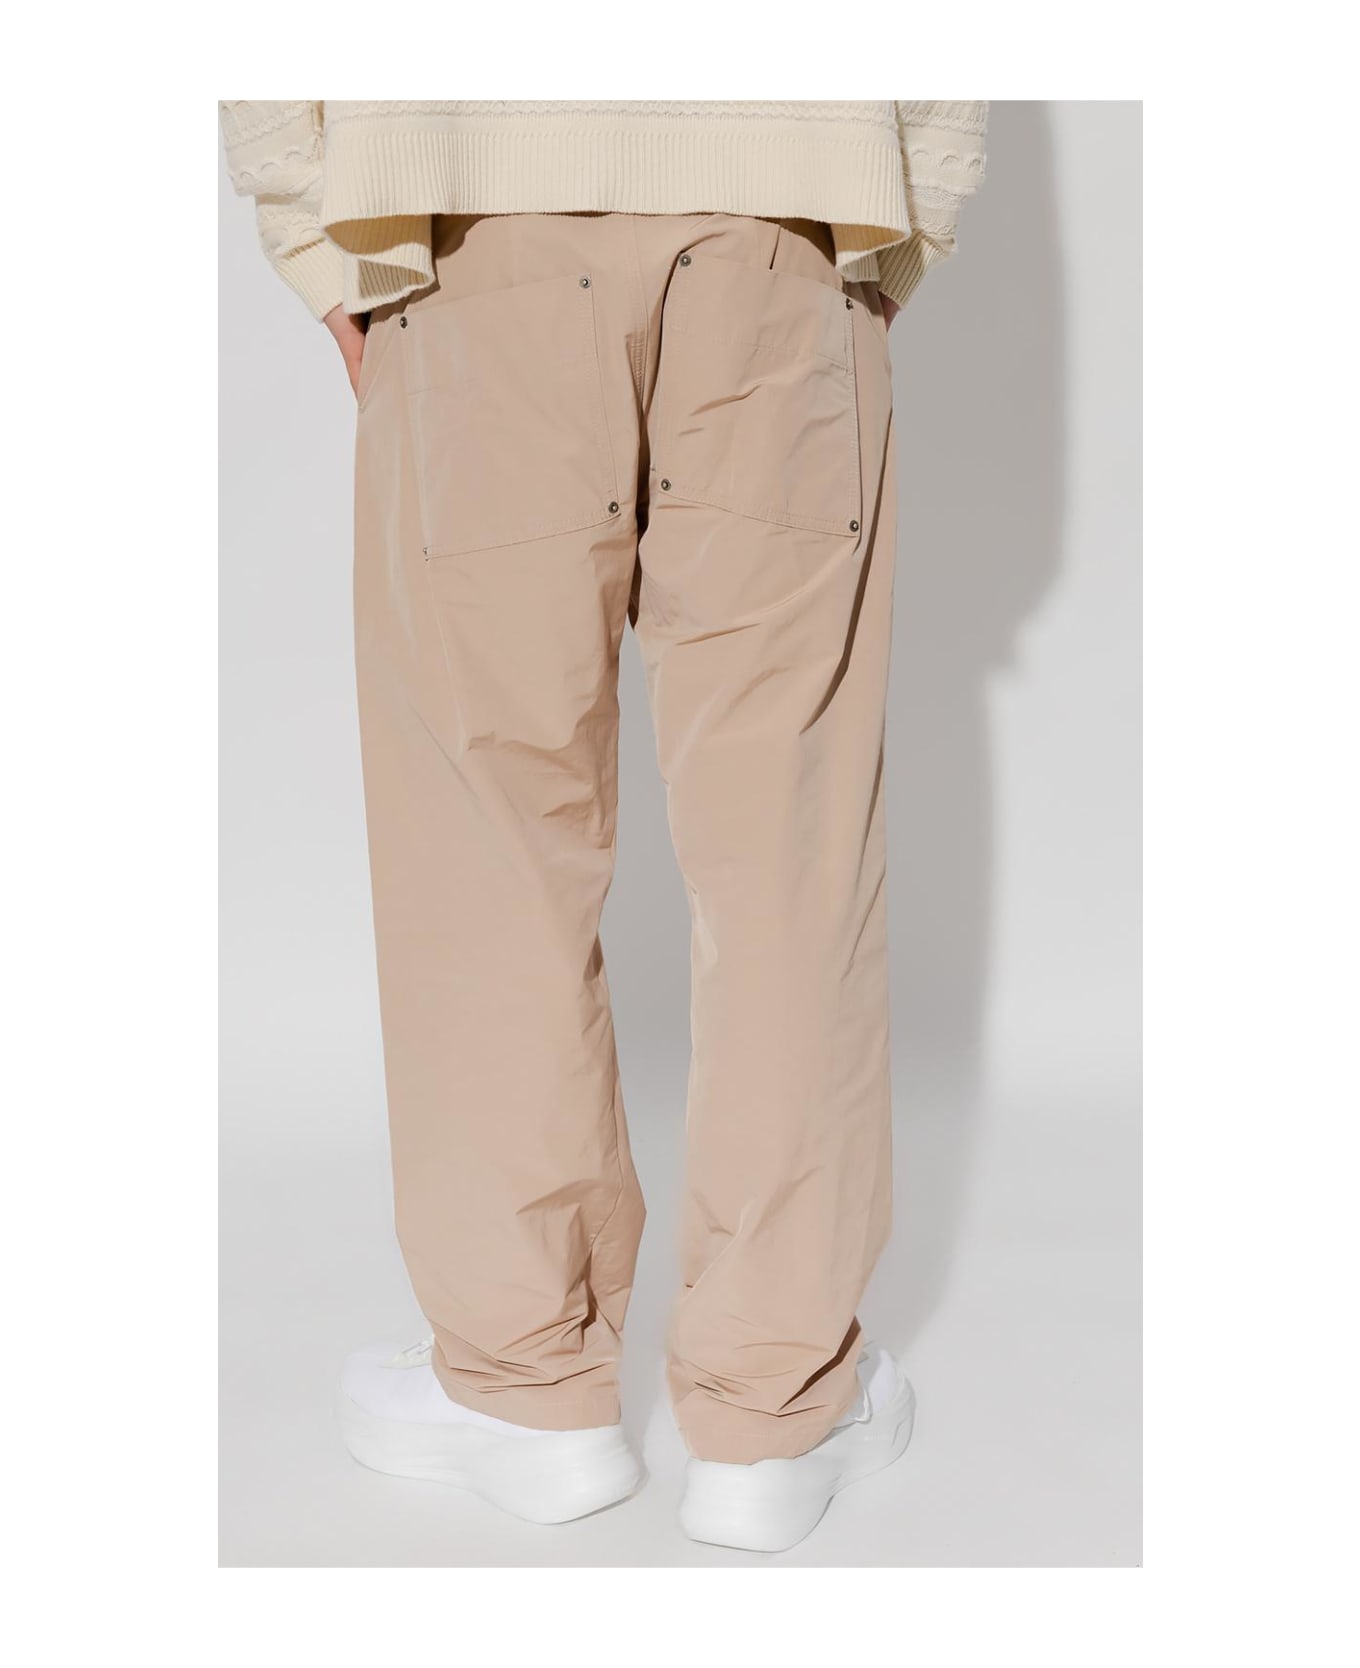 FourTwoFour on Fairfax Trousers panelled With Pockets - BEIGE